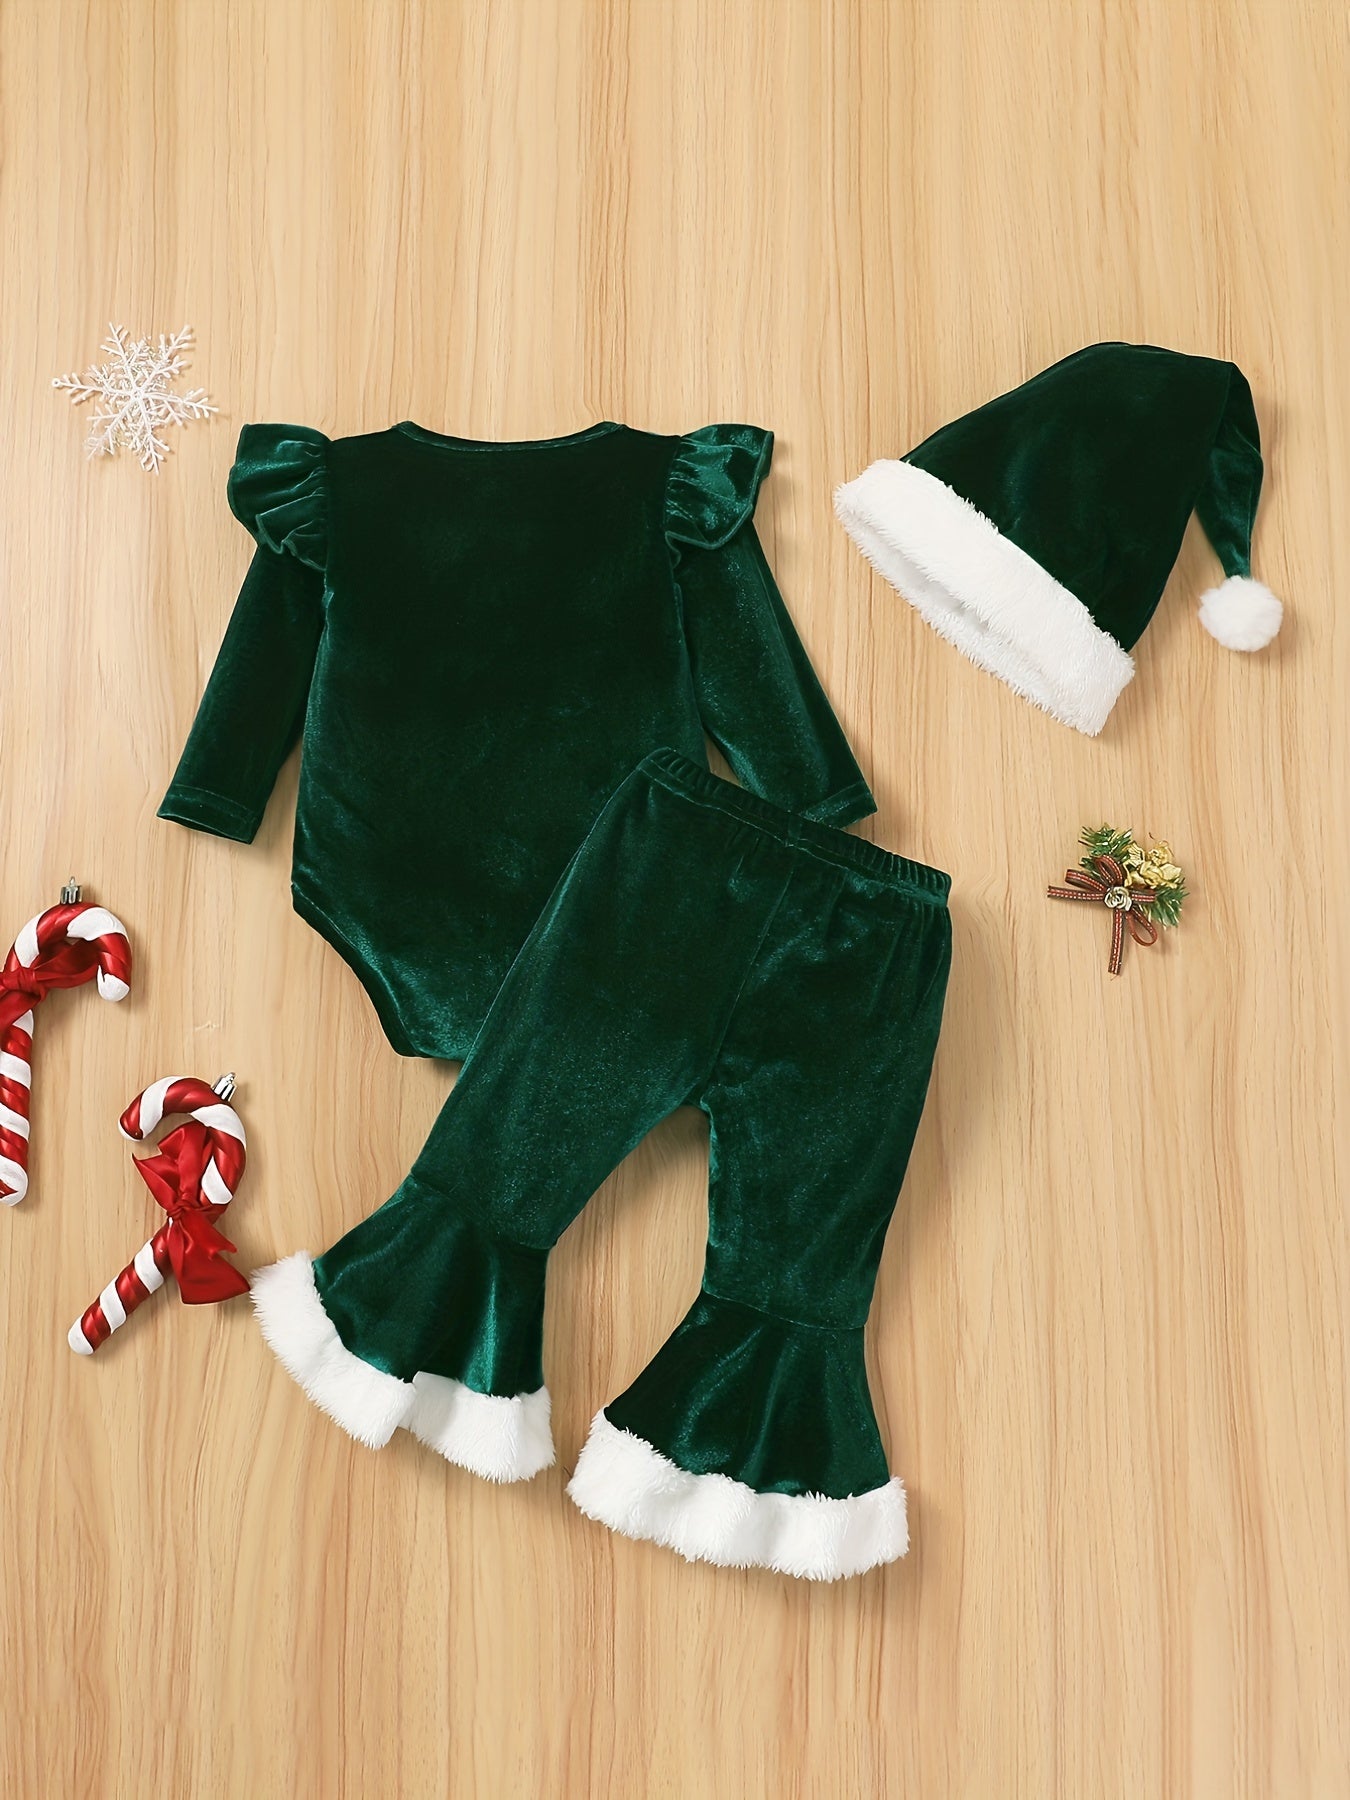 Baby Girls Long Sleeve Bodysuit & Flared Pants & Hat Set, Newborn Baby Set For Christmas Baby Clothes